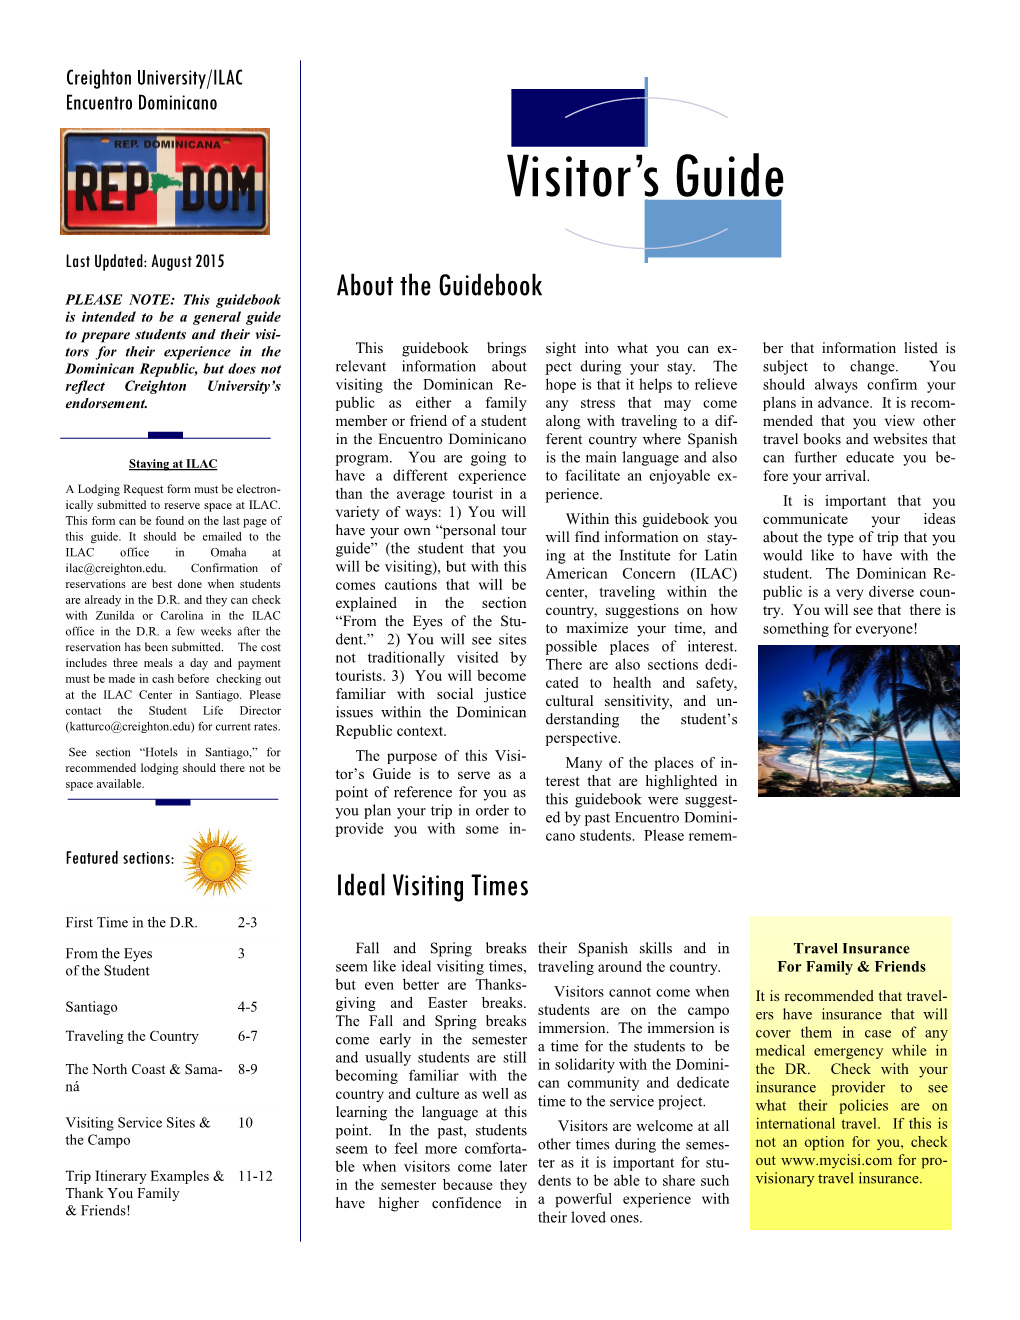 Visitor's Guide